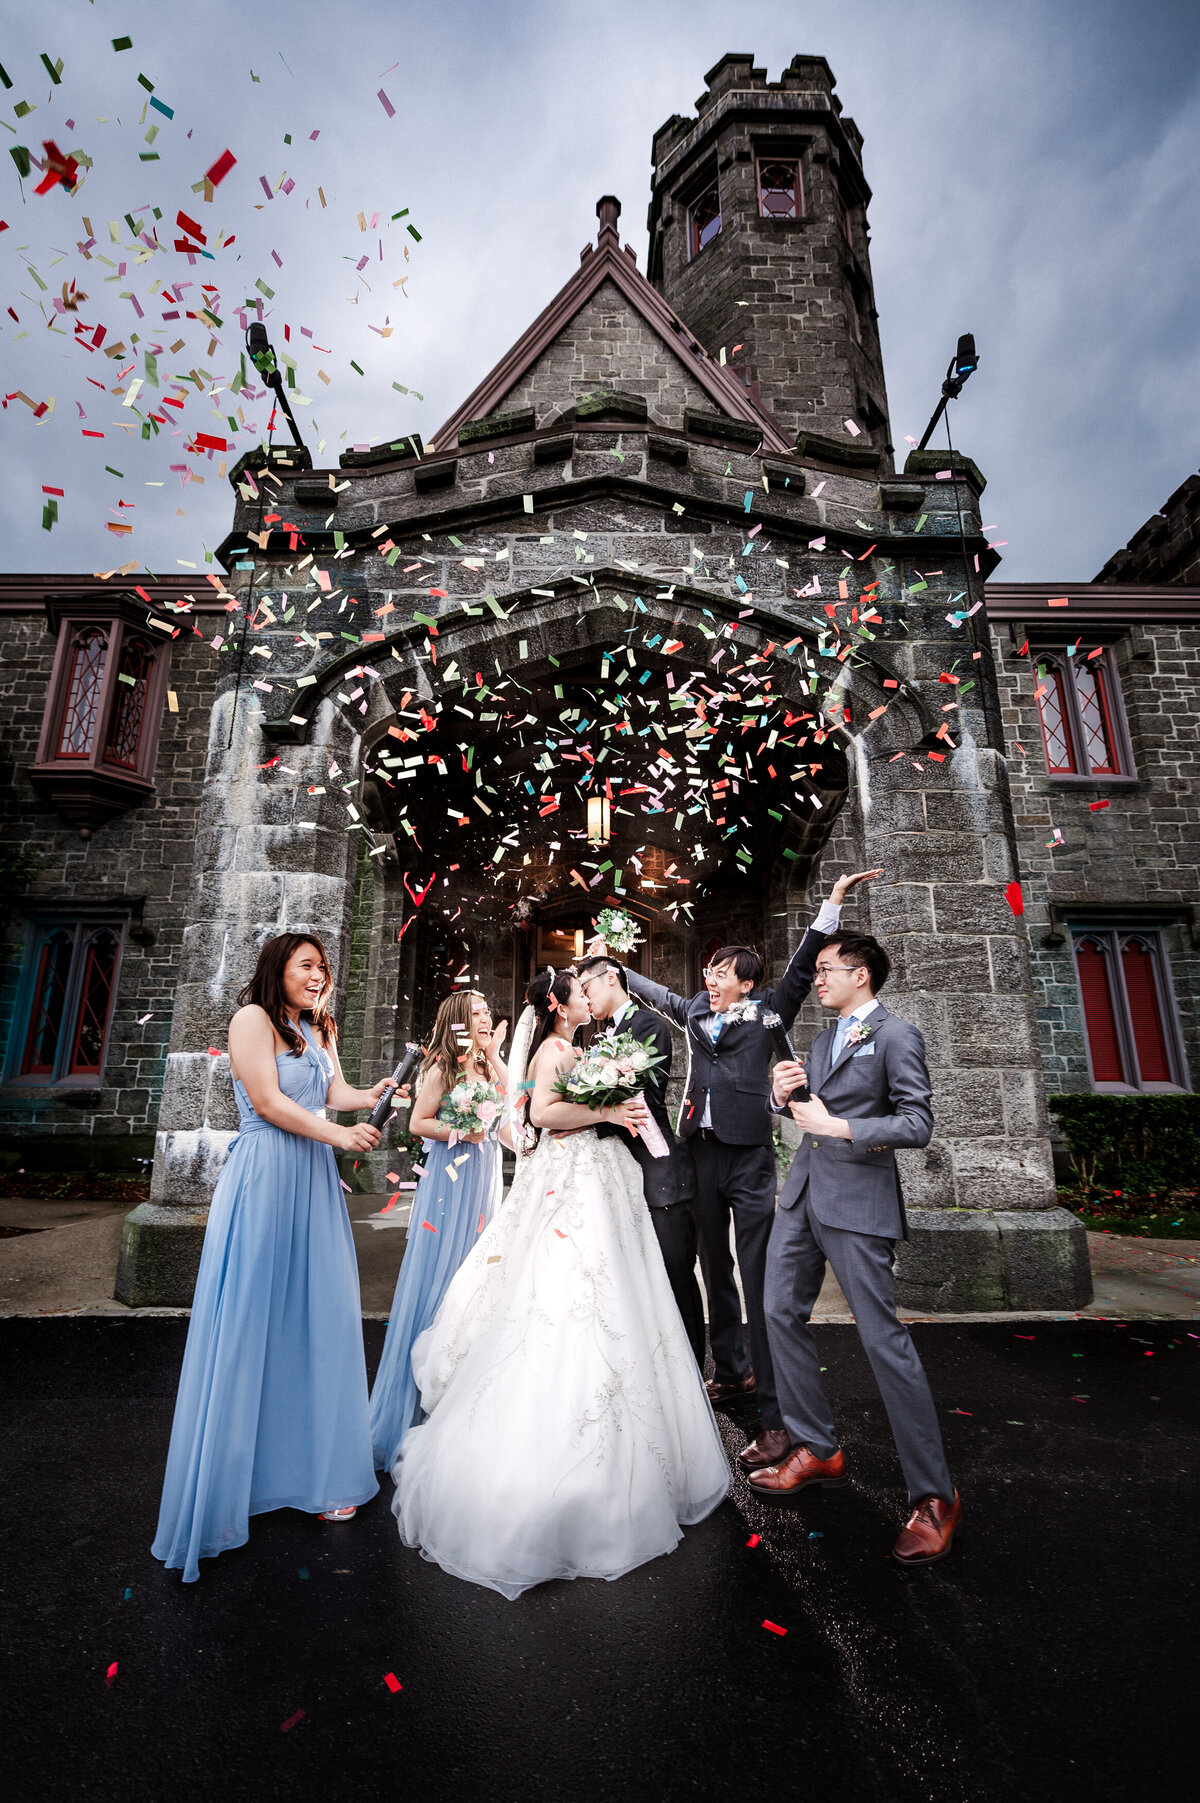 whittby-castle-wedding-photos-by-suess-moments-nyc-photographer (21 of 46)